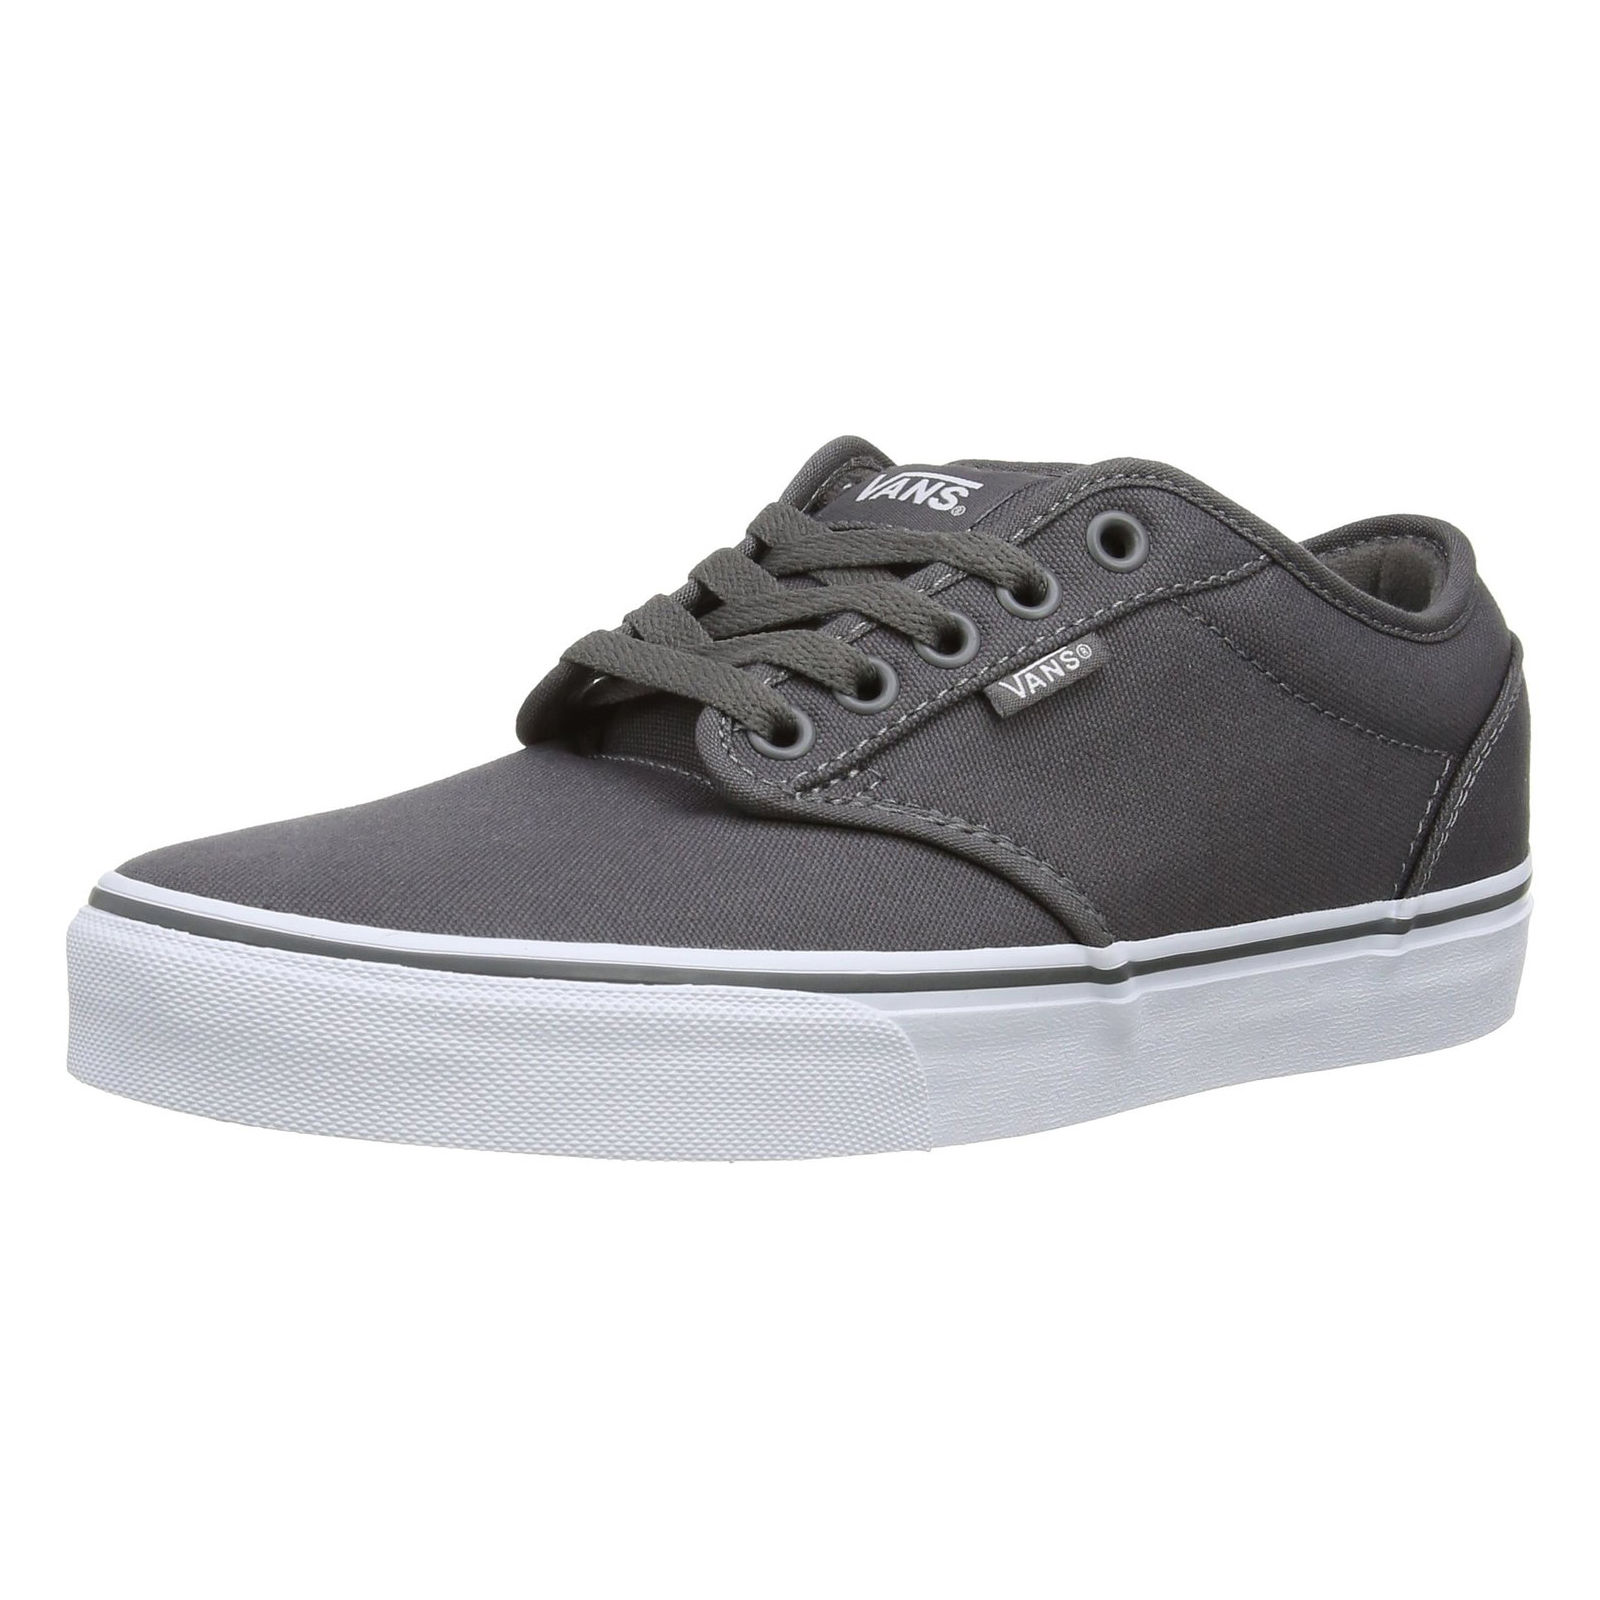 VANS Atwood Mens Canvas Skater Trainers 